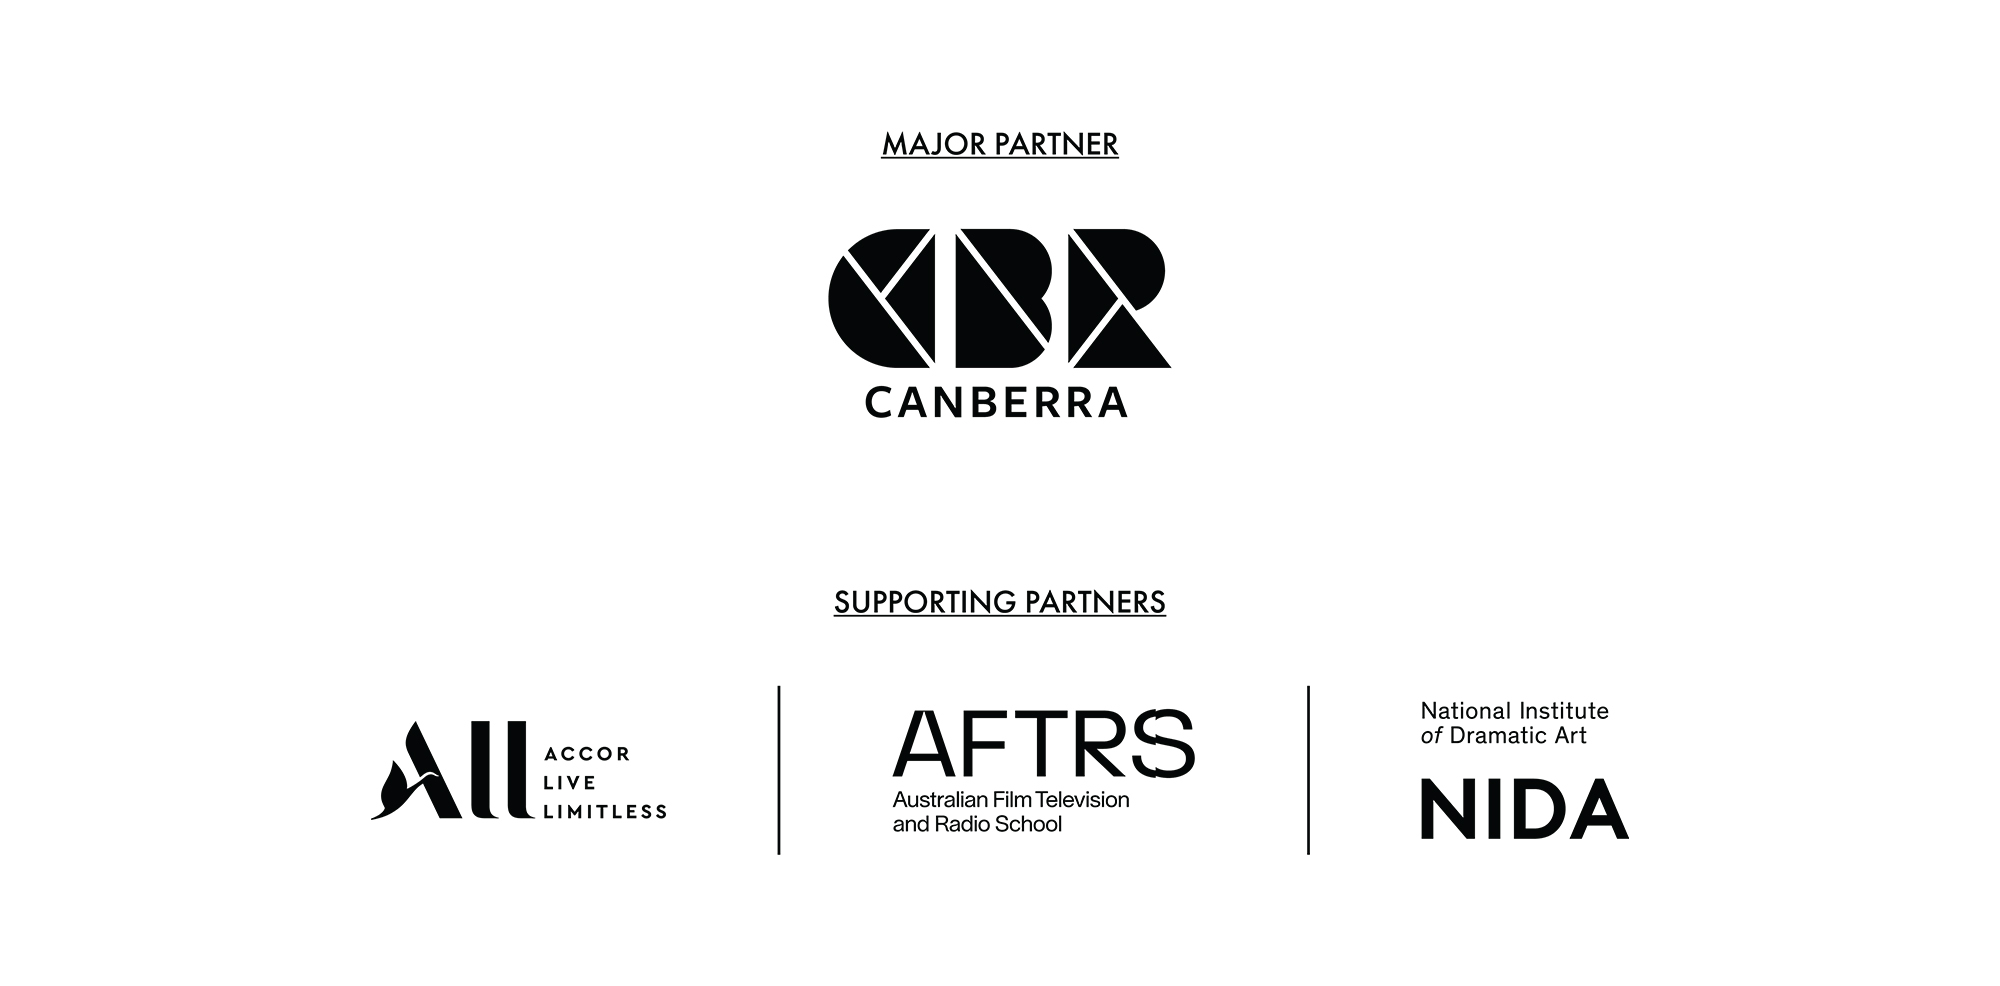 Image displaying some black and white logos for Accor, AFTRS, NIDA and Canberra